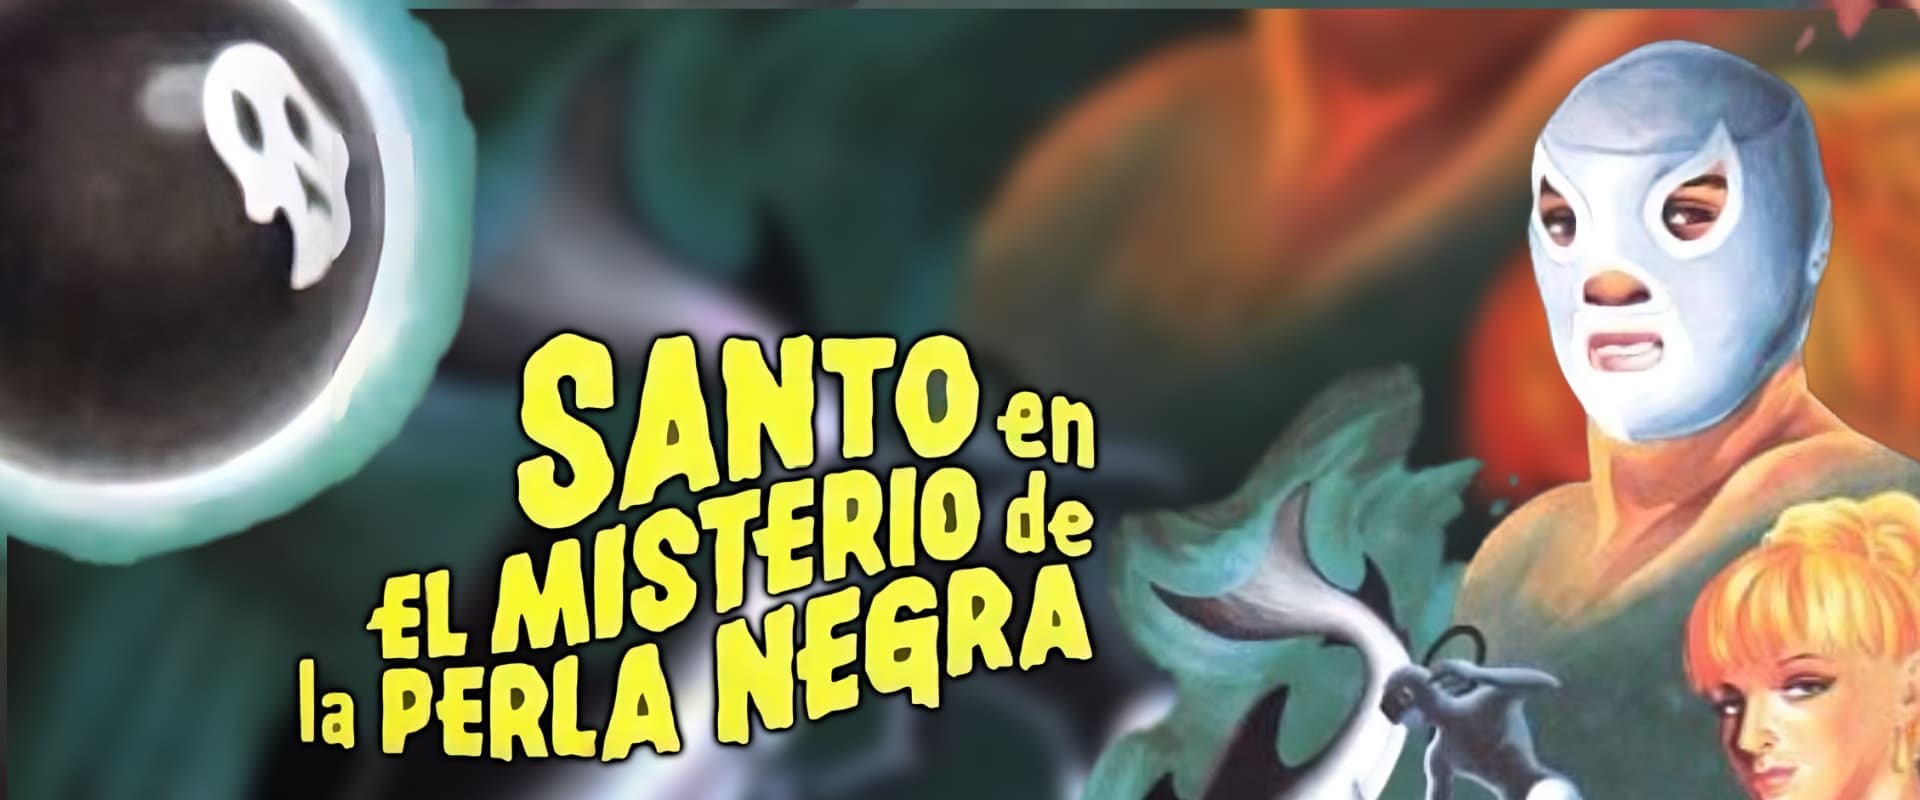 Santo in the Mystery of the Black Pearl